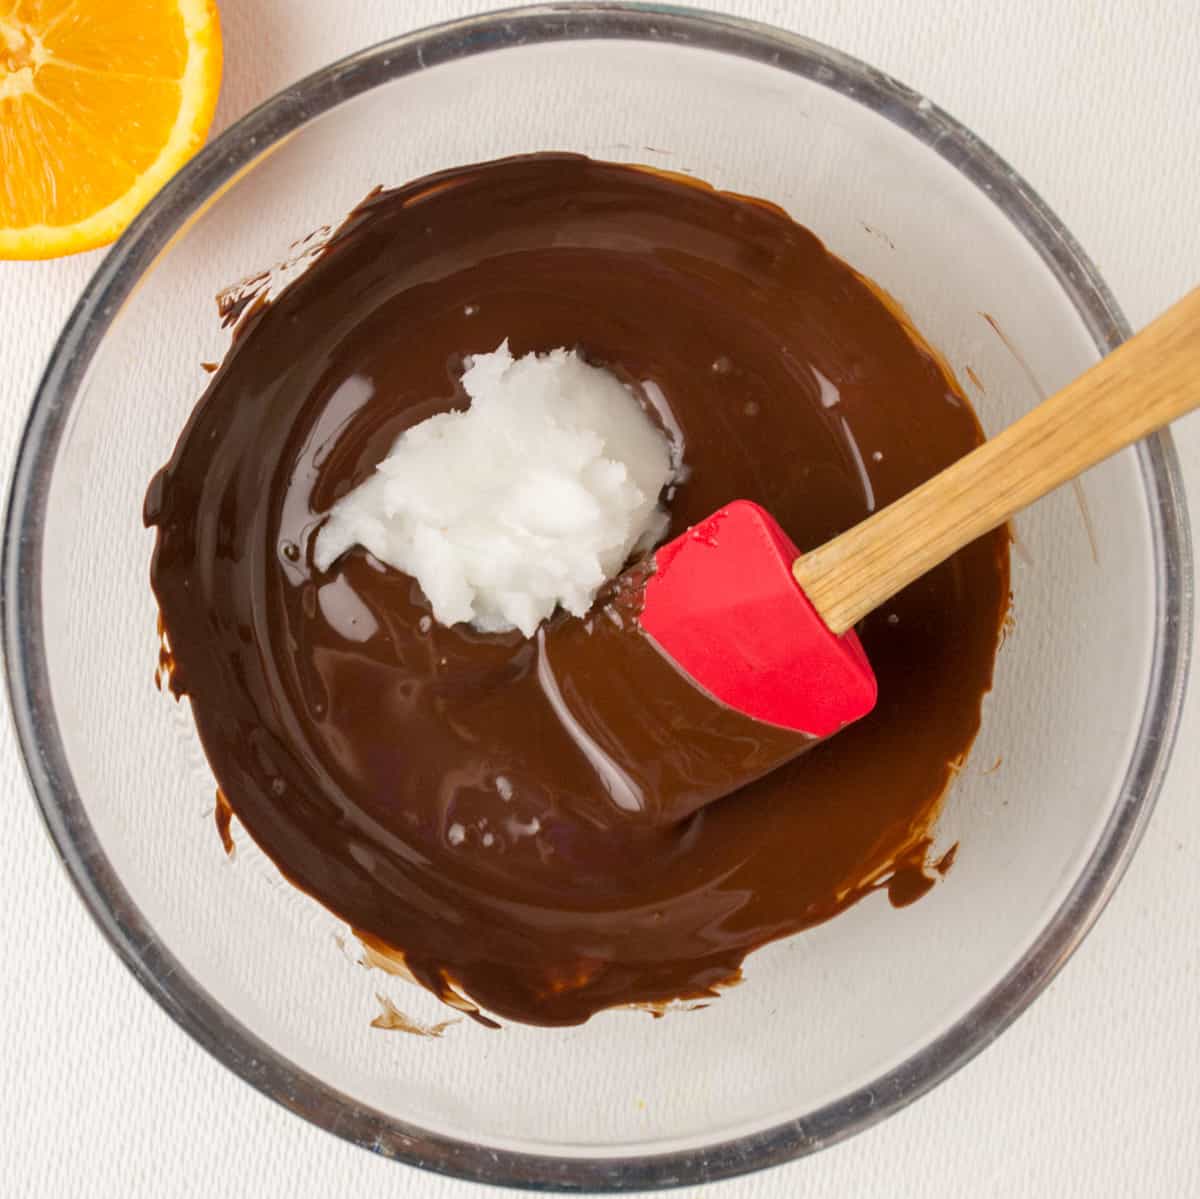 Adding coconut oil to the melted chocolate.